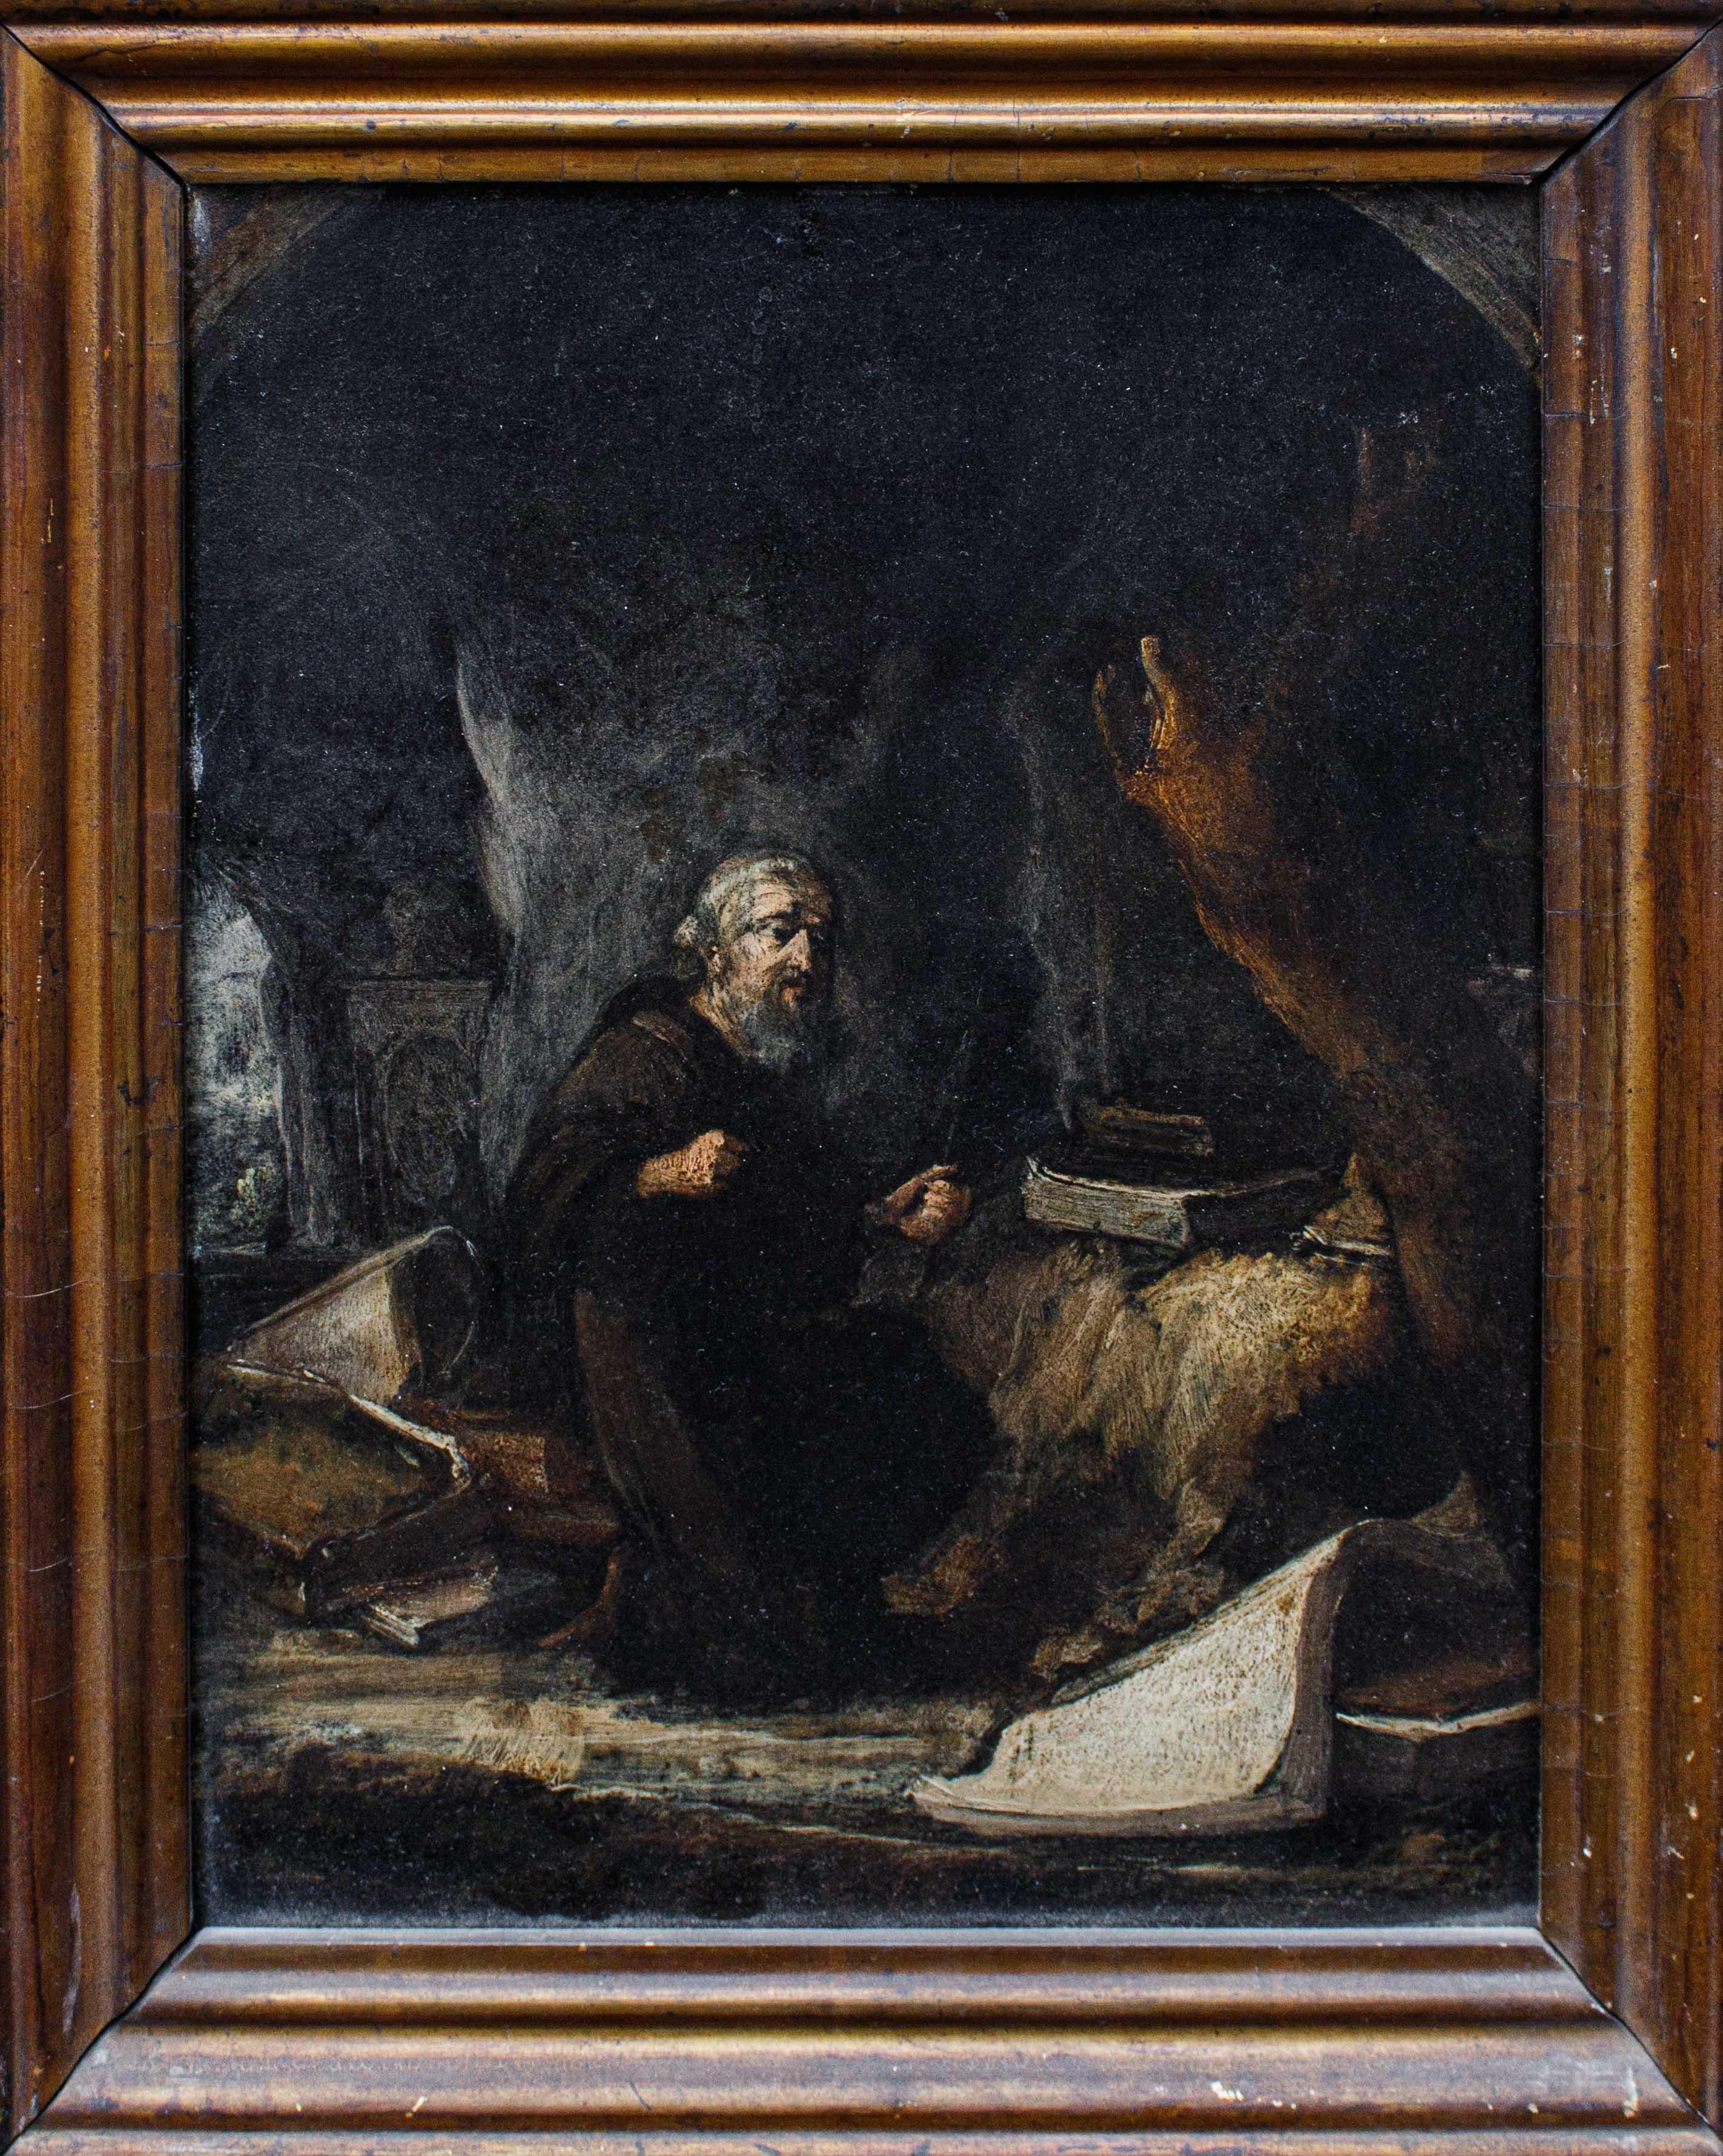 St. Anthony at Prayer Painting on Copper Follower of David Teniers the Younger